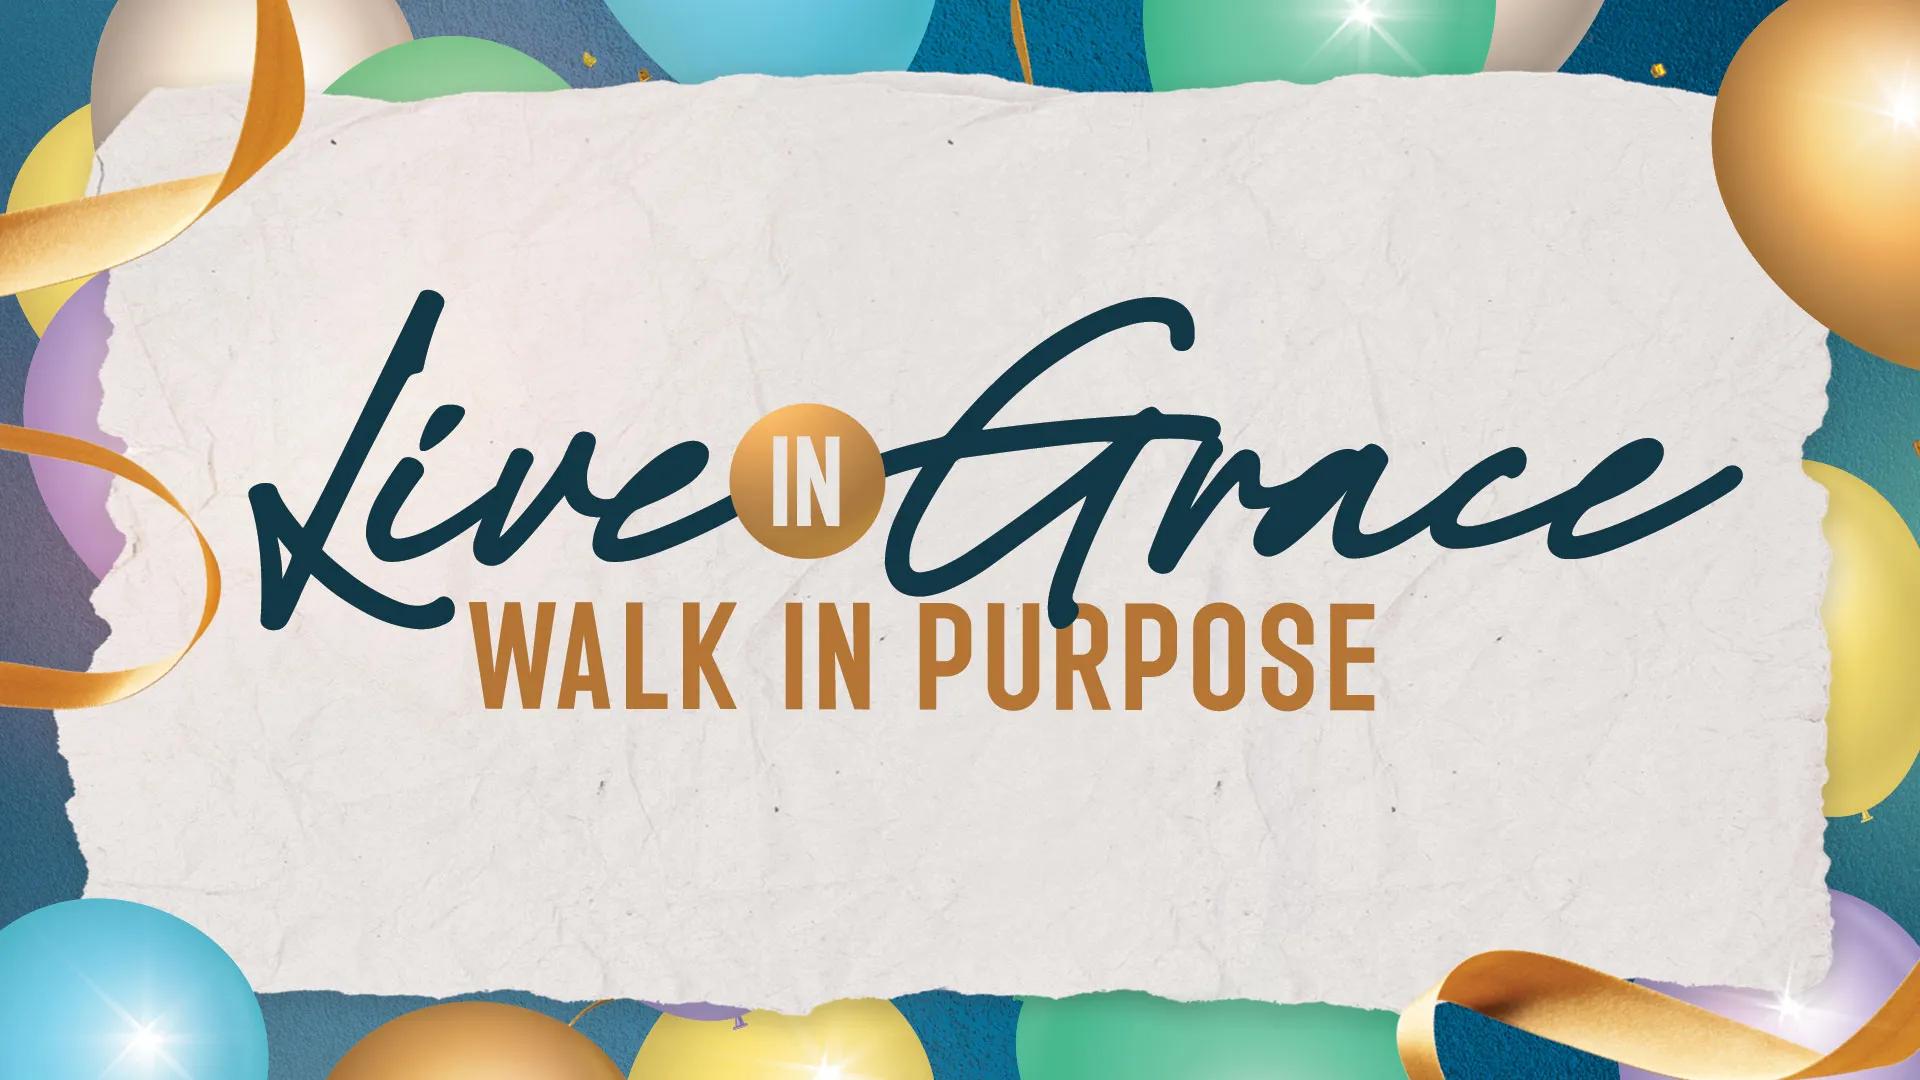 A backdrop full of balloons with the words "live in grace, walk in purpose" written on a paper-like background.